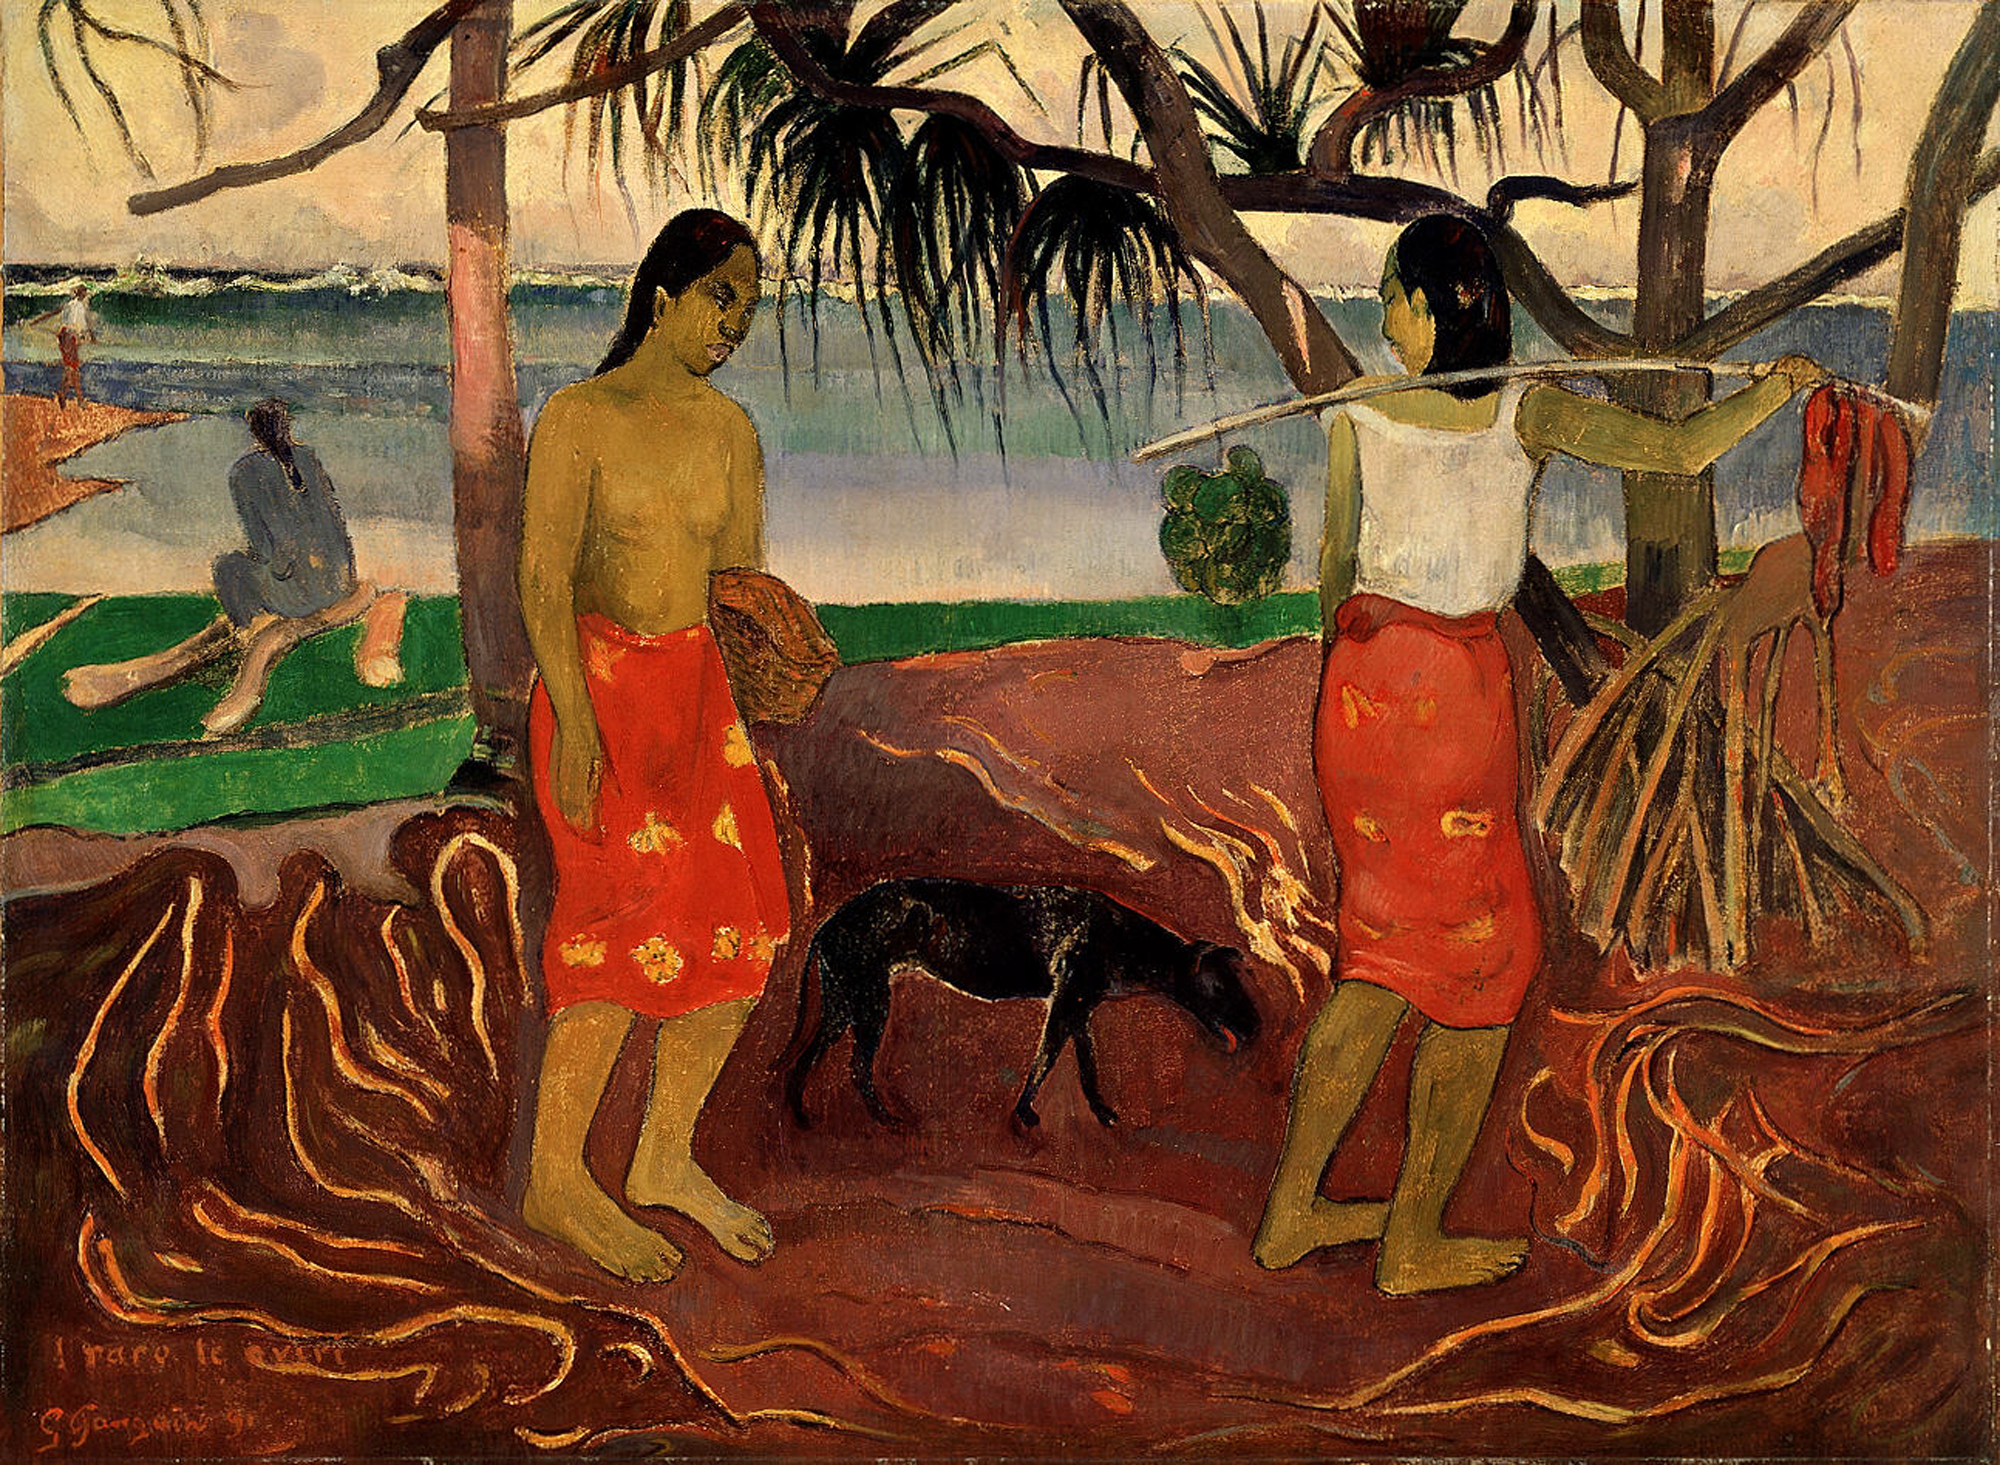 THERESE DE DILLMONT (AND GAUGUIN)